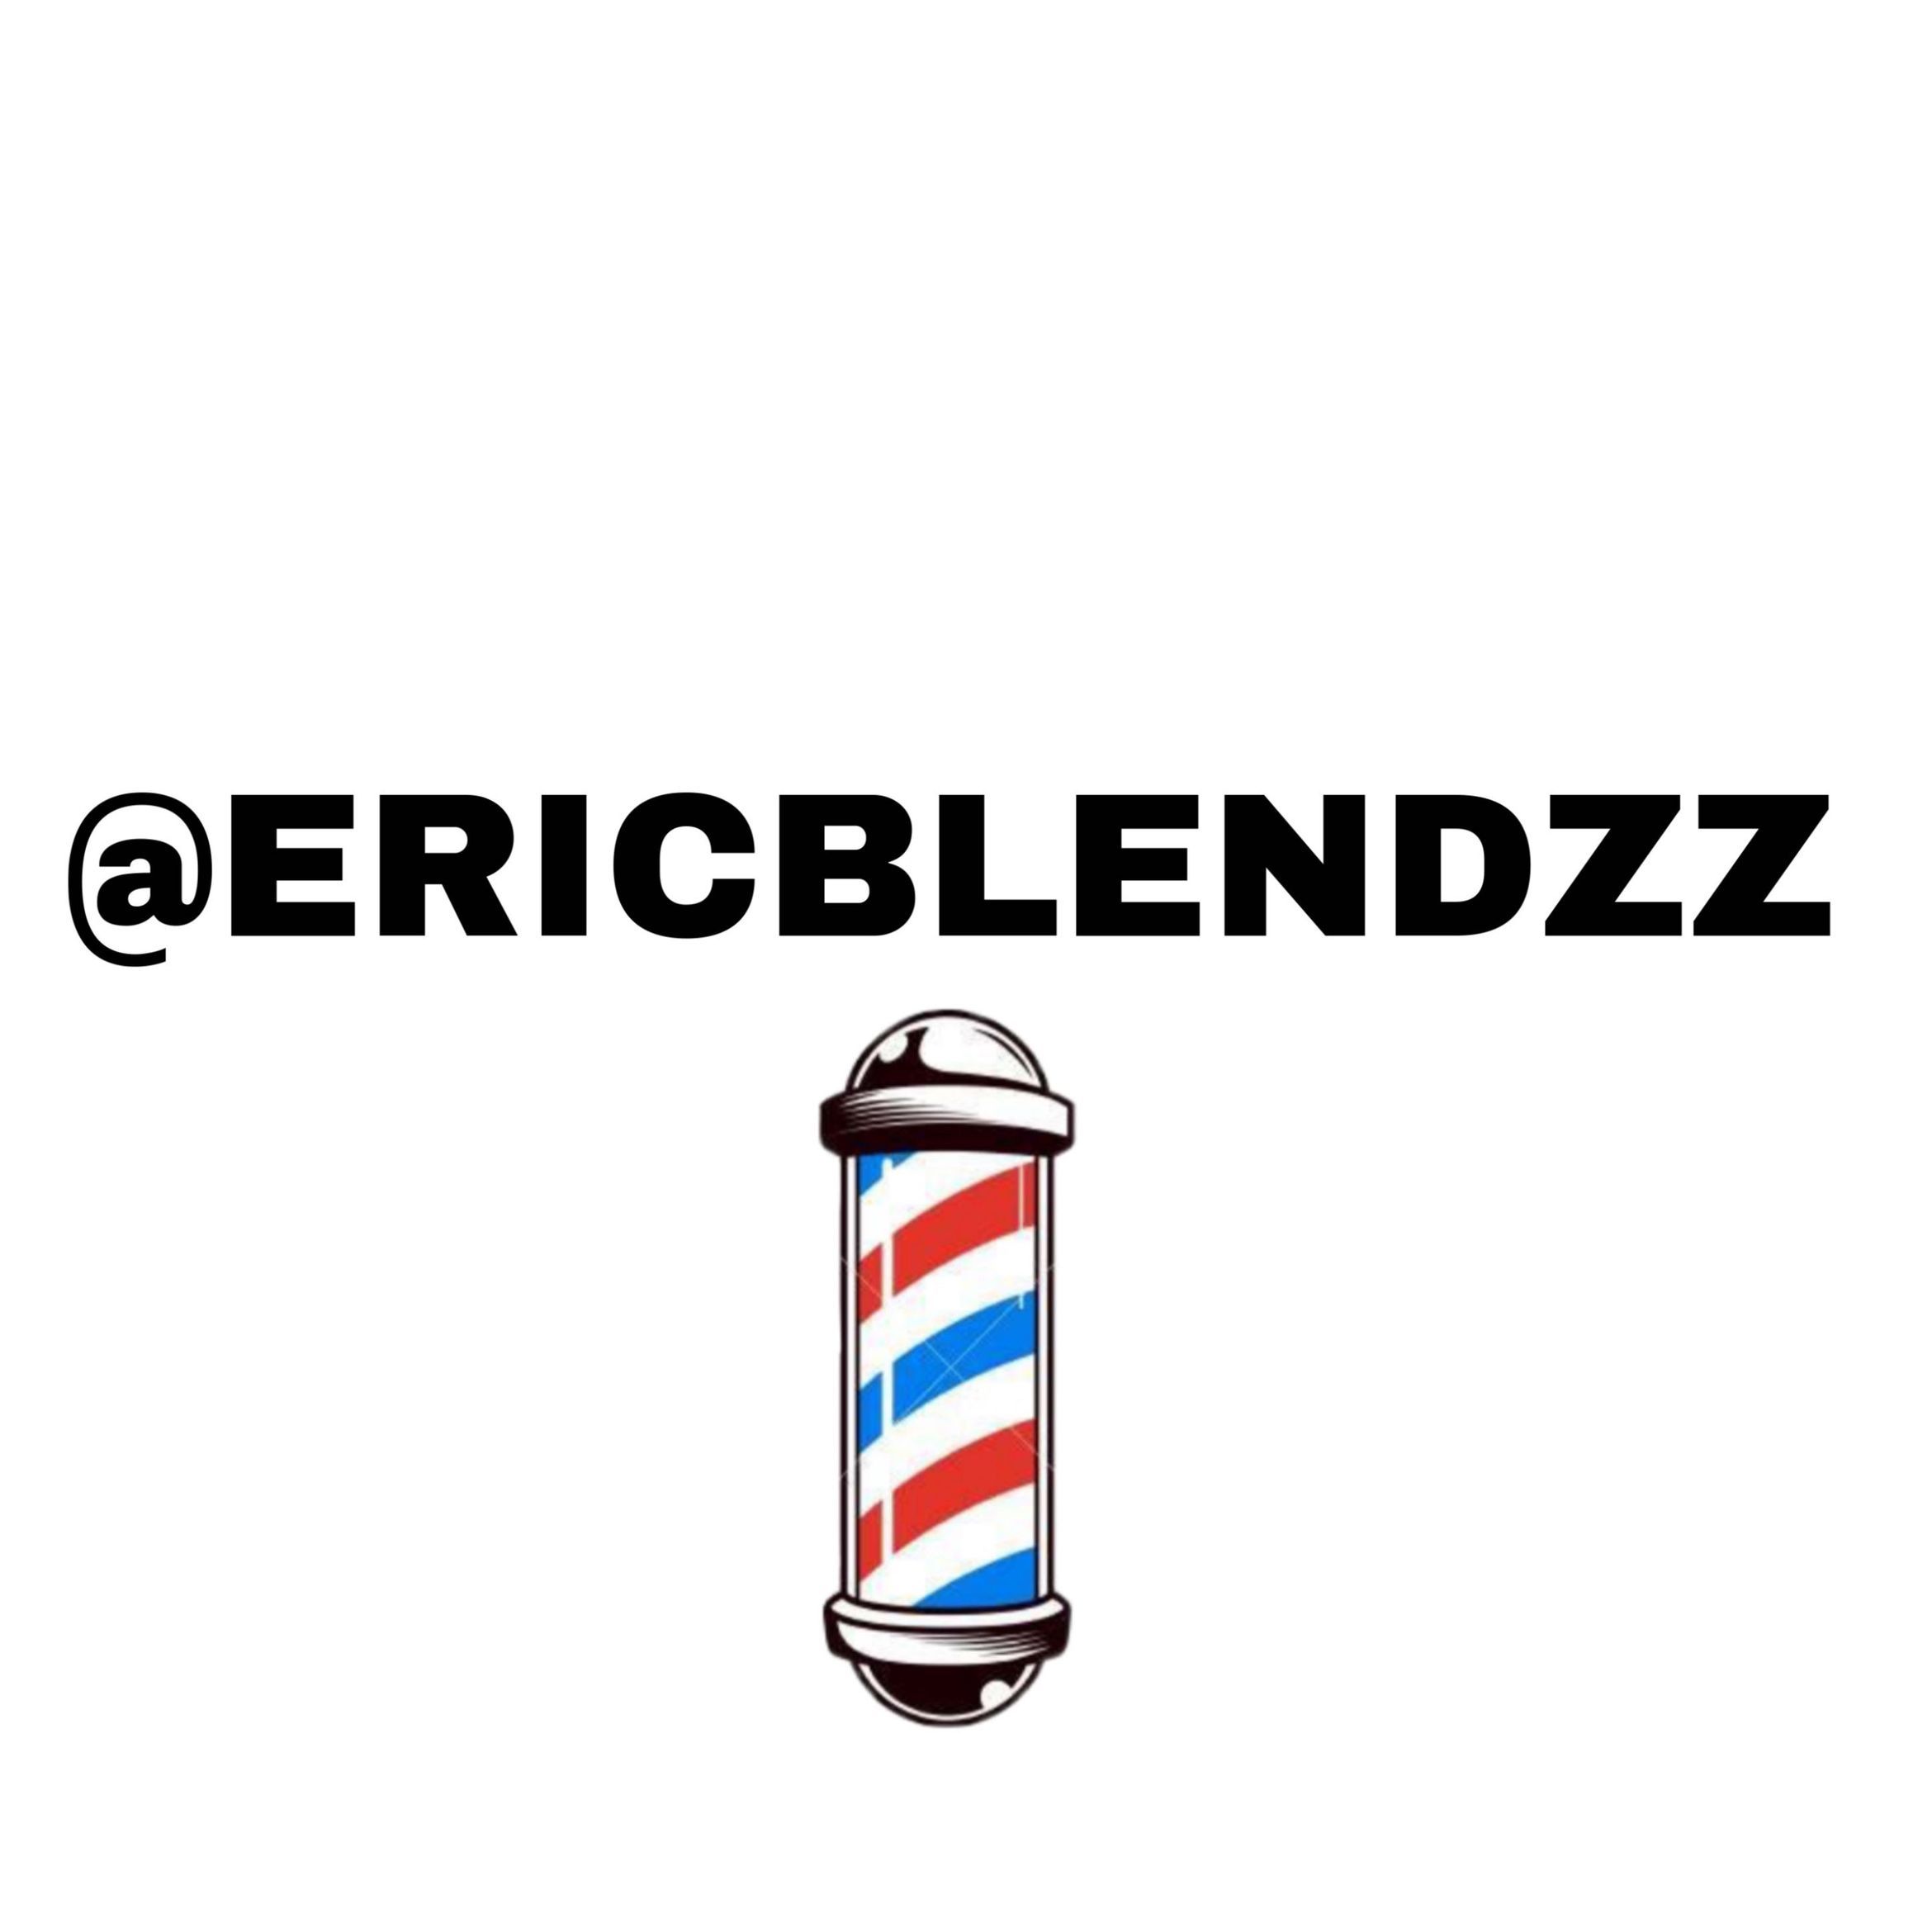 Ericblendzz @Clippers Barbershop, 141 N Twin Oaks Valley Rd Unit 126 San Marcos, CA 92069 United States, San Marcos, 92069